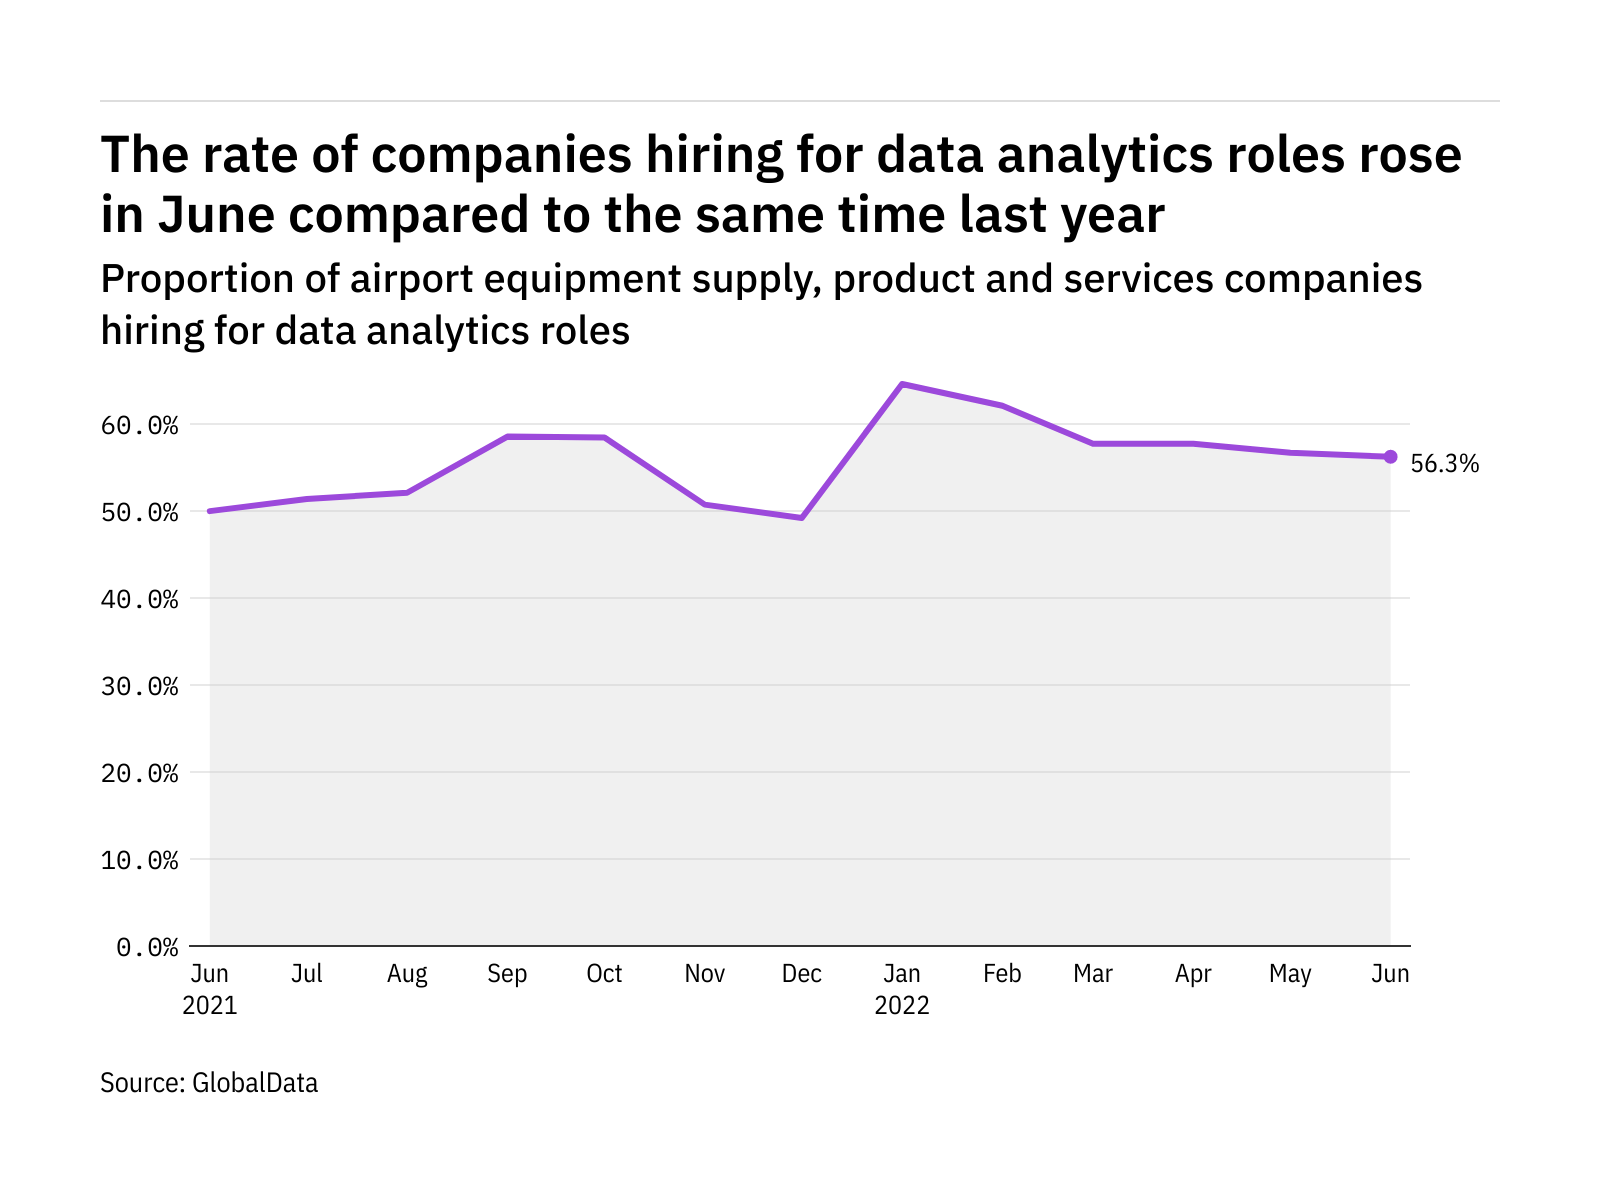 Data analytics hiring levels in the airport industry rose in June 2022